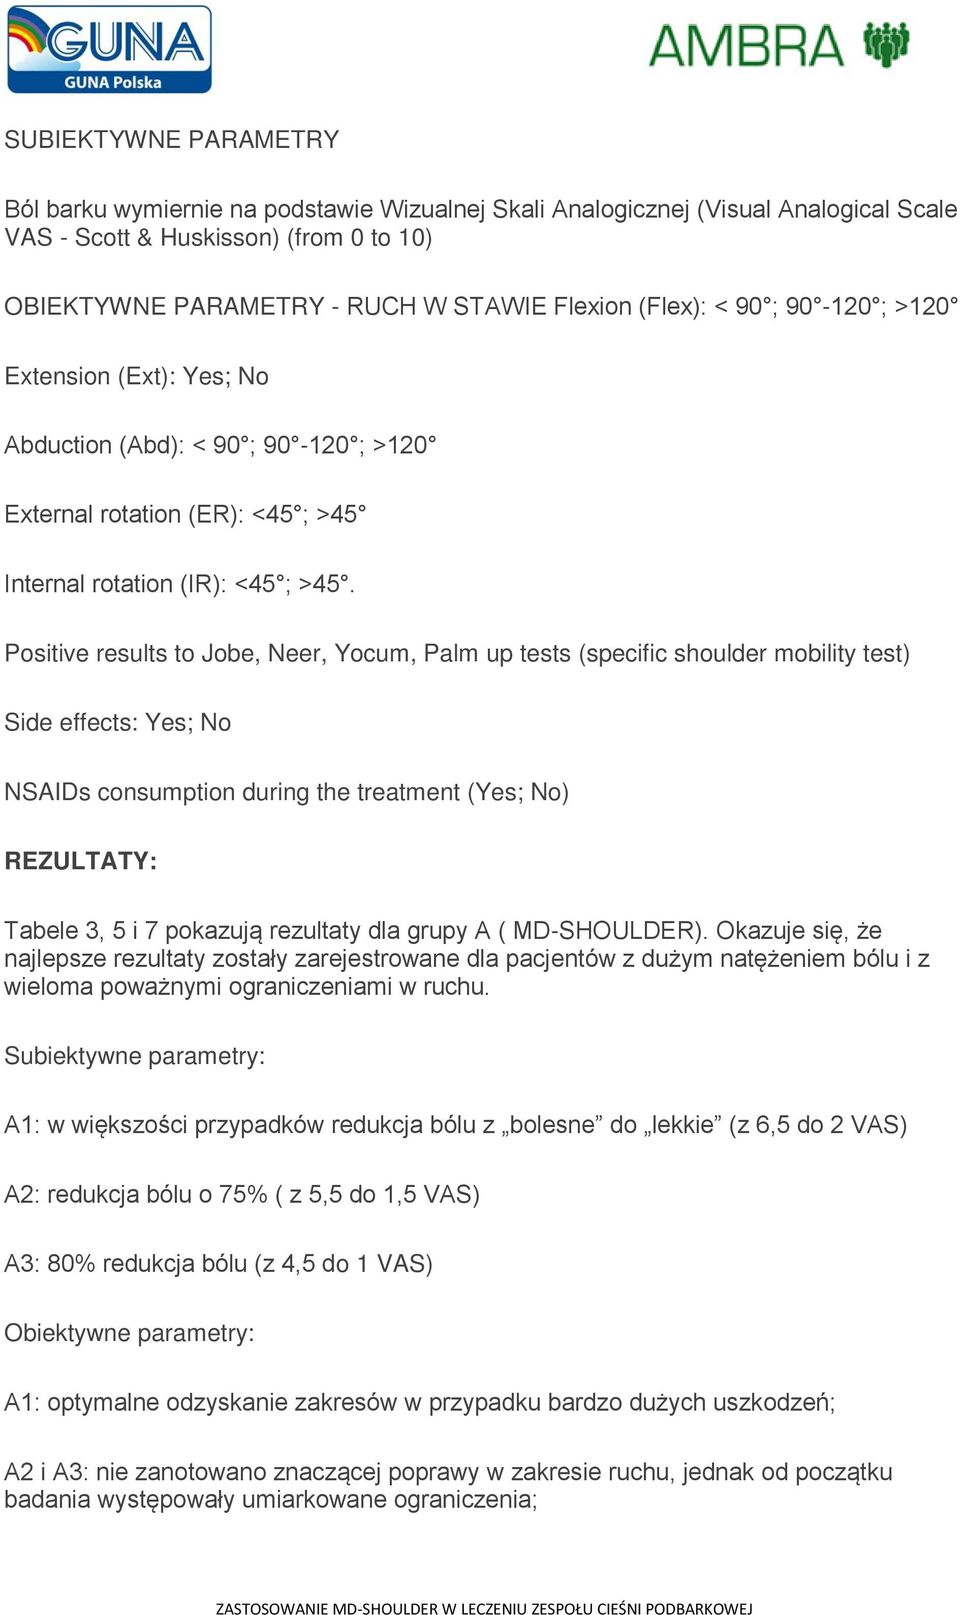 Positive results to Jobe, Neer, Yocum, Palm up tests (specific shoulder mobility test) Side effects: Yes; No NSAIDs consumption during the treatment (Yes; No) REZULTATY: Tabele 3, 5 i 7 pokazują